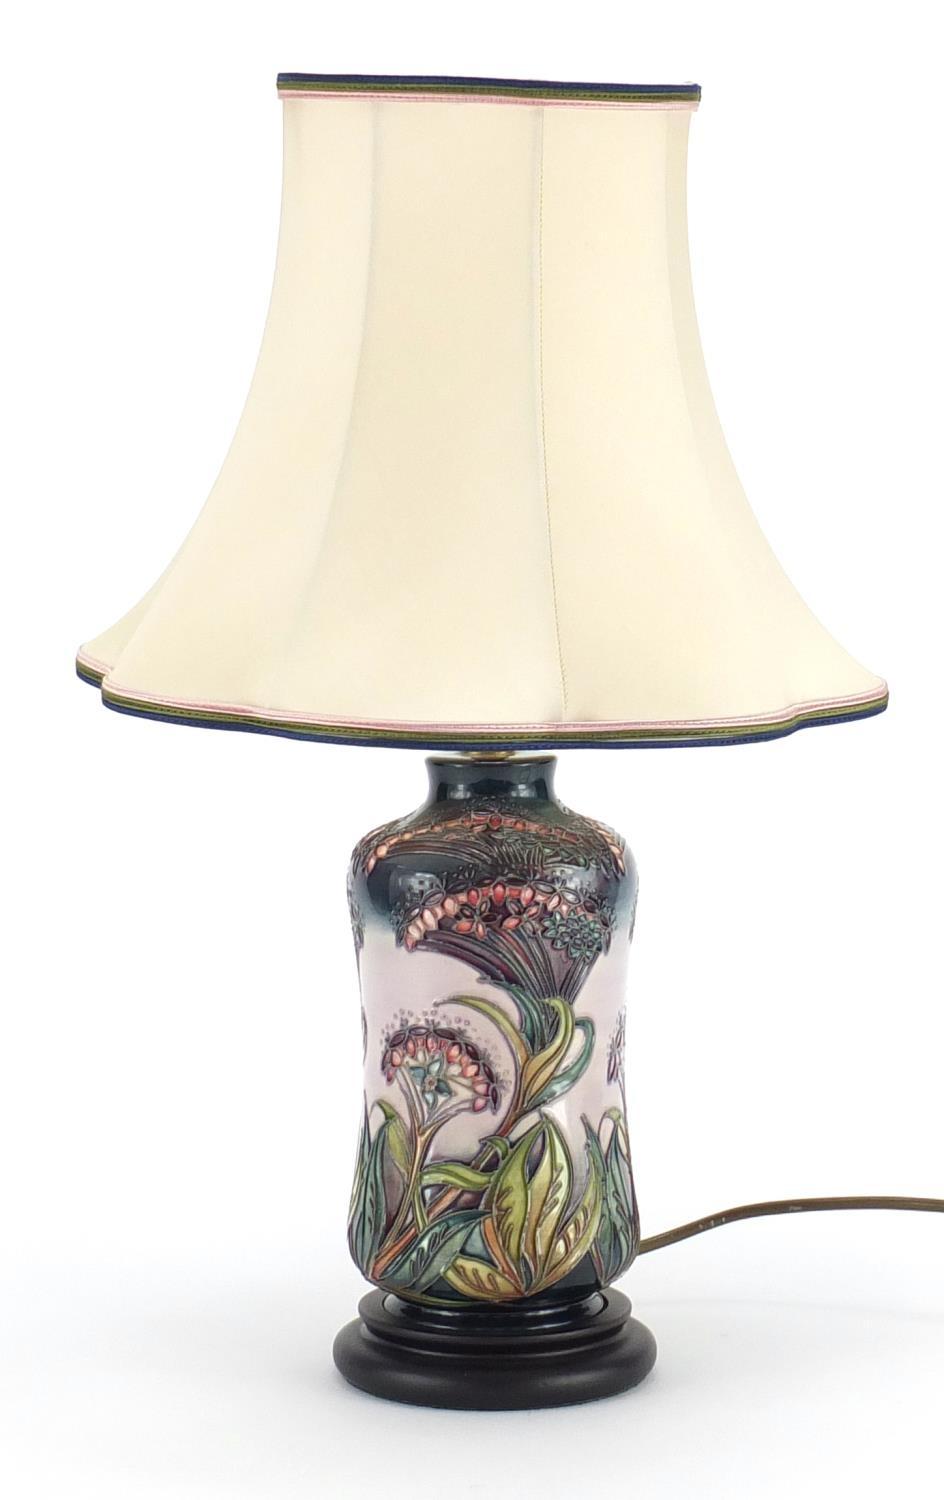 Moorcroft pottery lamp base with silk lined shade, hand painted and tube lined with stylised